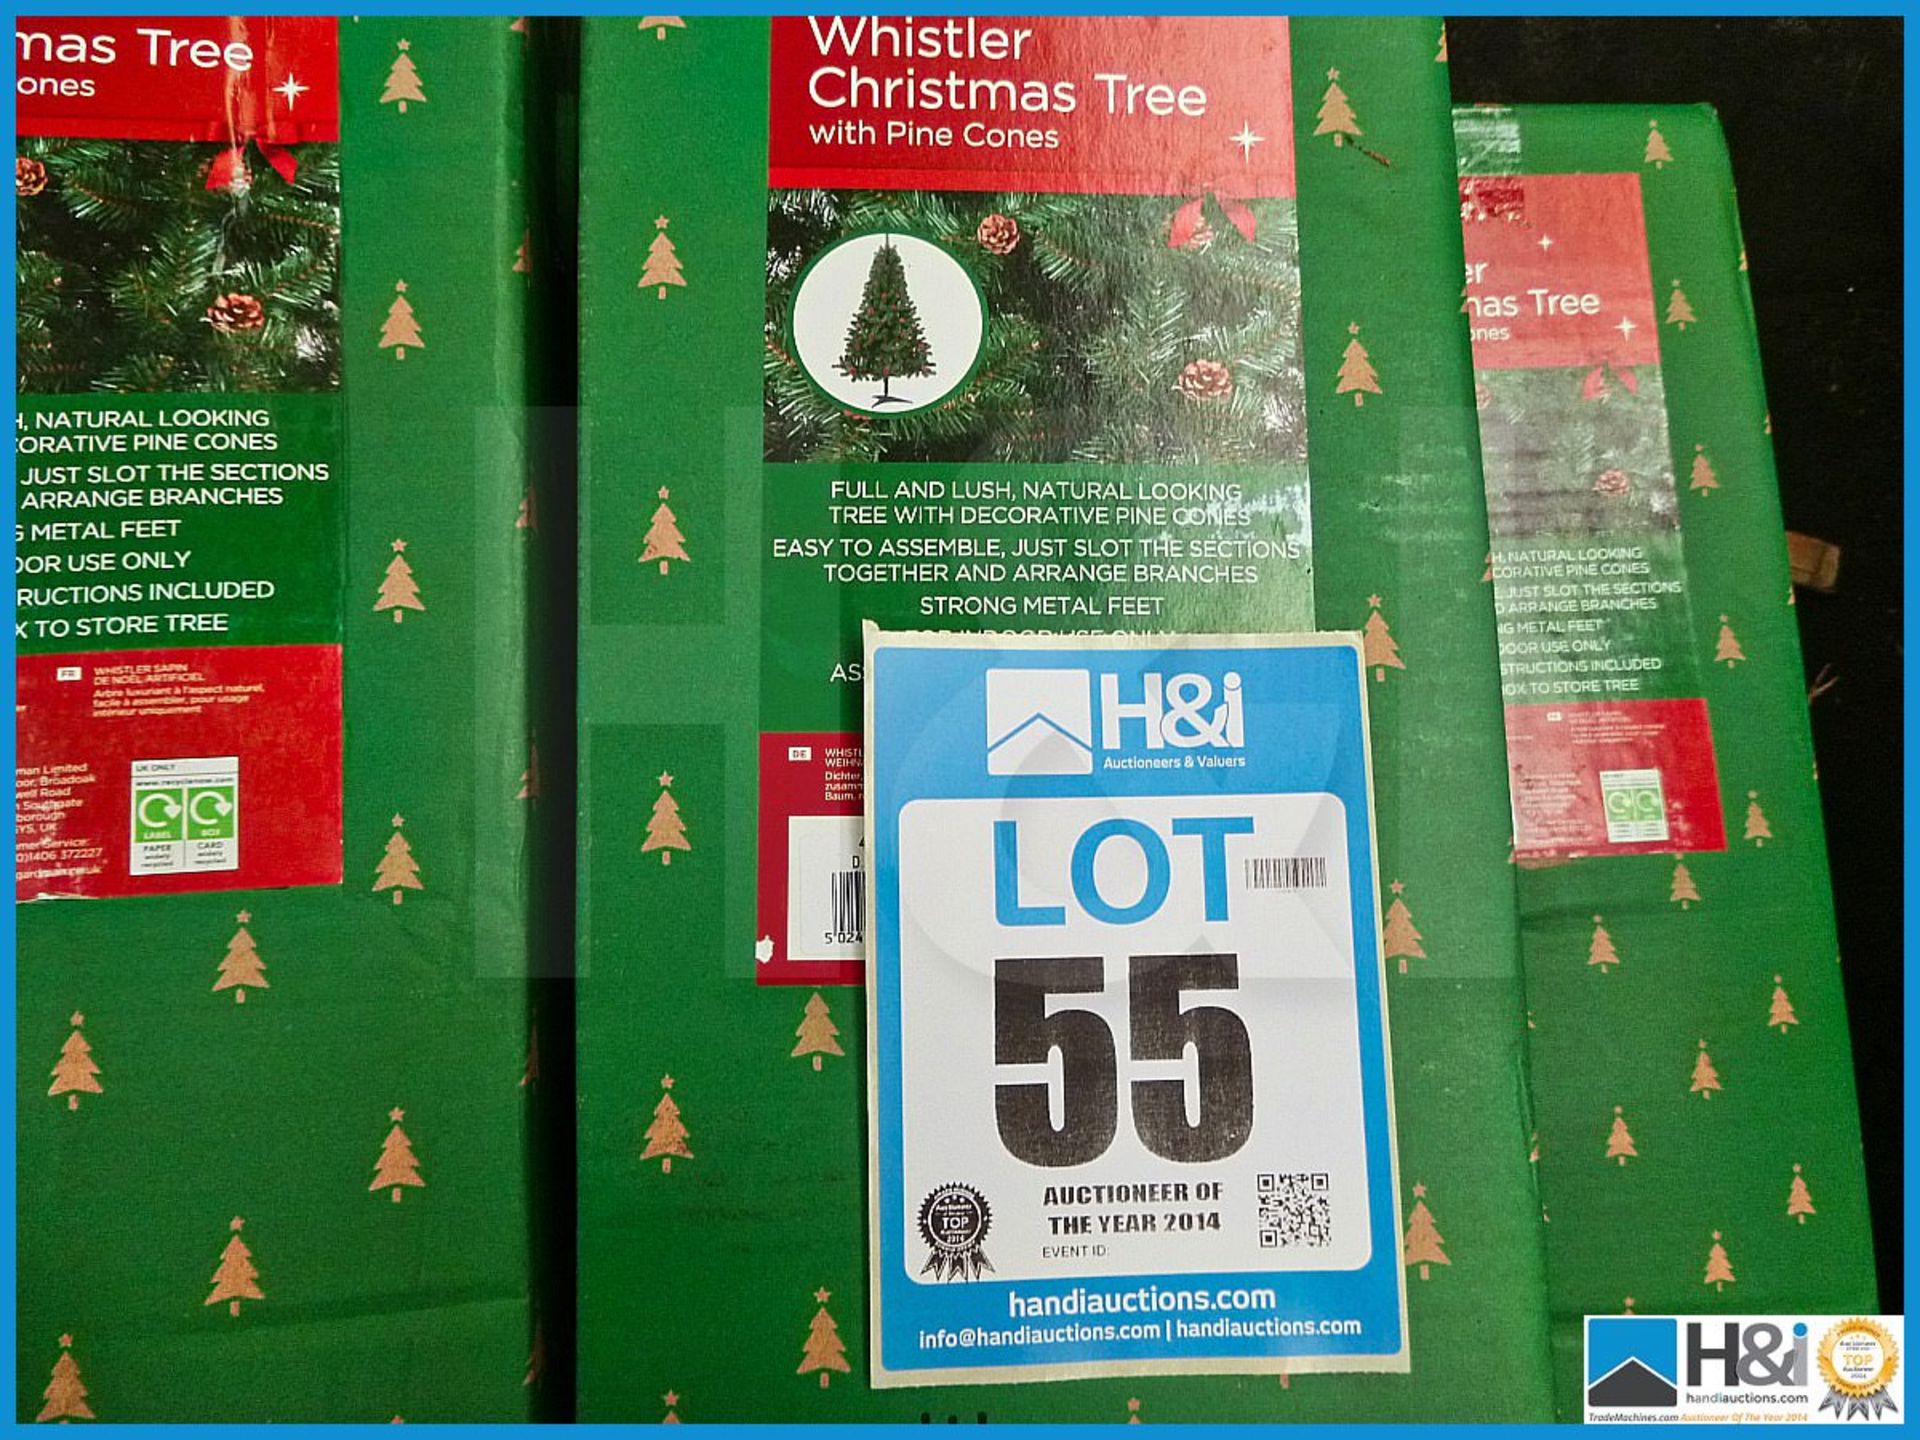 GARDMAN ARTIFICIAL 6' WHISTLER FROSTED CHRISTMAS TREE WITH CONES, 43029XS, RRP £85.99, FULL AND LUSH